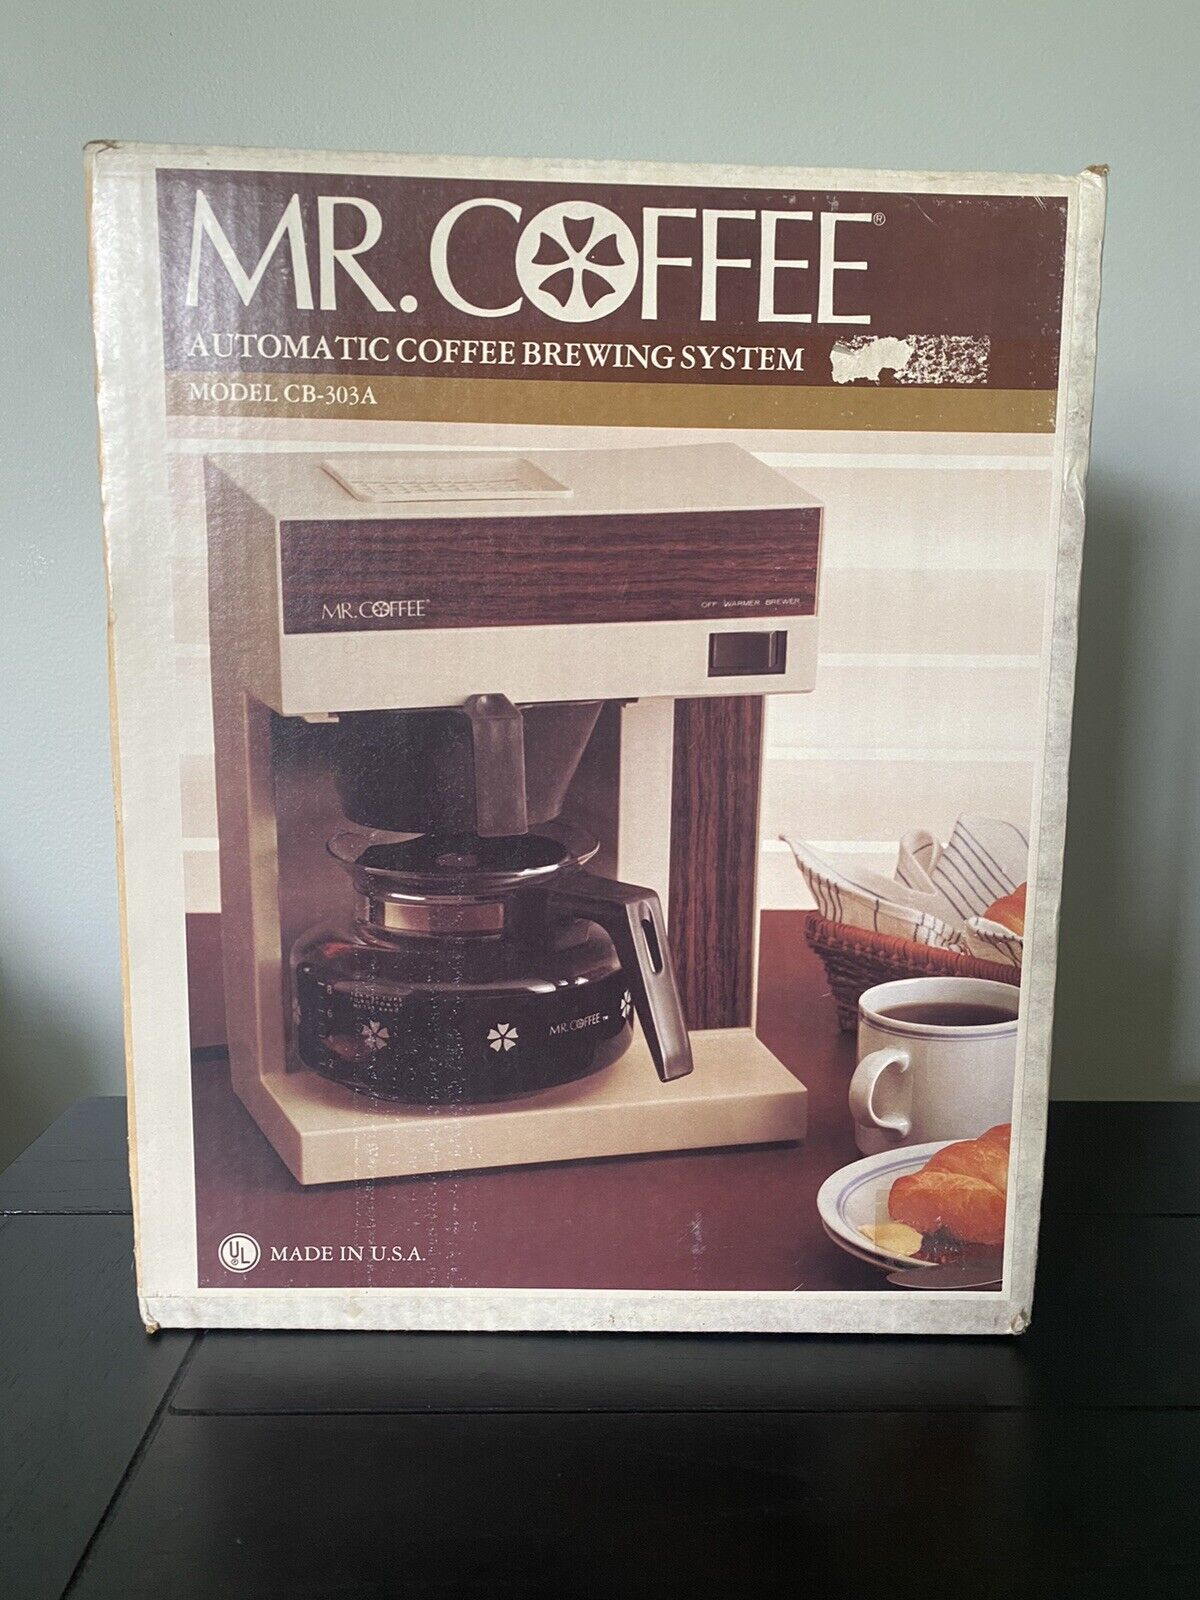 NEW Vintage Mr. Coffee 10 Cup Automatic Coffee Maker Tan Brown CB-303a